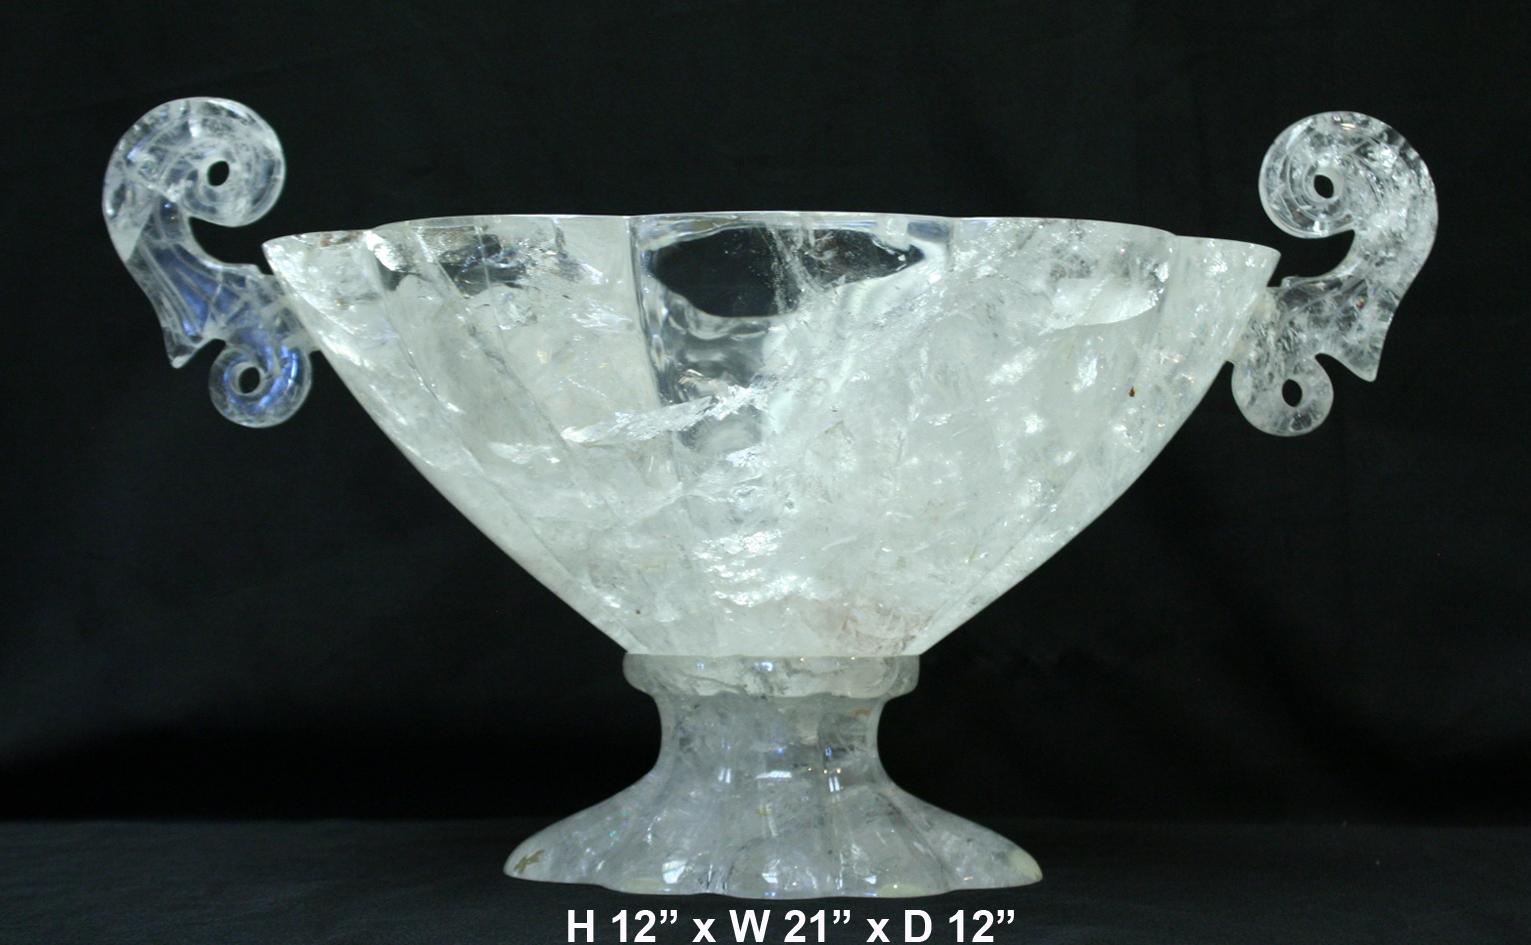 Exquisite large hand carved and hand-polished rock crystal oval centerpiece with curved handles.
The outside is hand carved scalloped motif.
Meticulous attention has been given to the carving and the quality.
Rock crystal centerpieces are